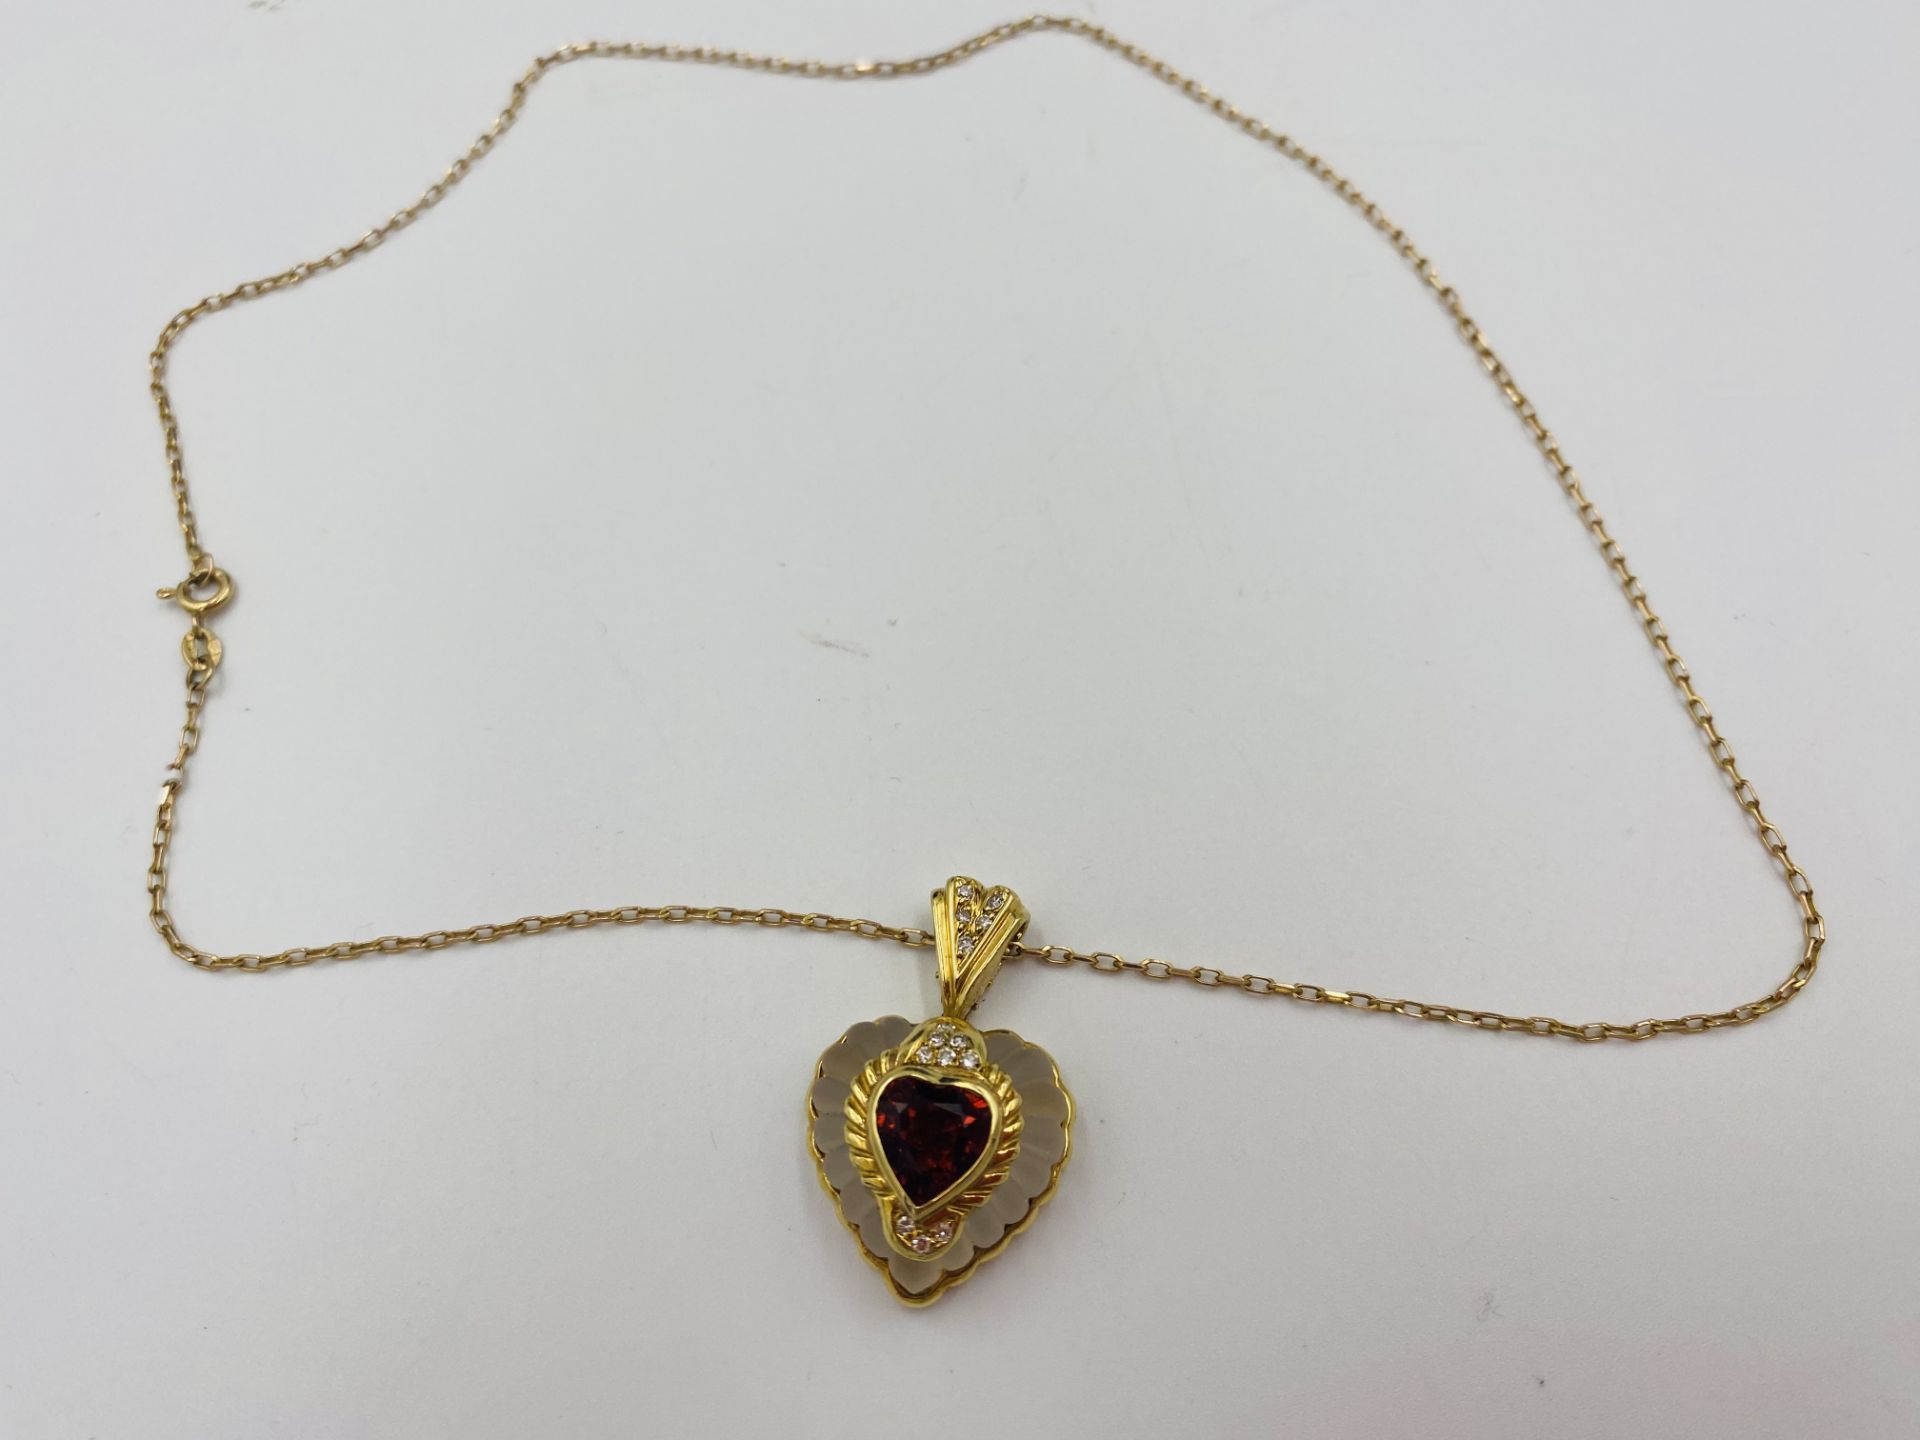 Rock crystal heart shaped pendant with 18ct gold mount - Bild 6 aus 6